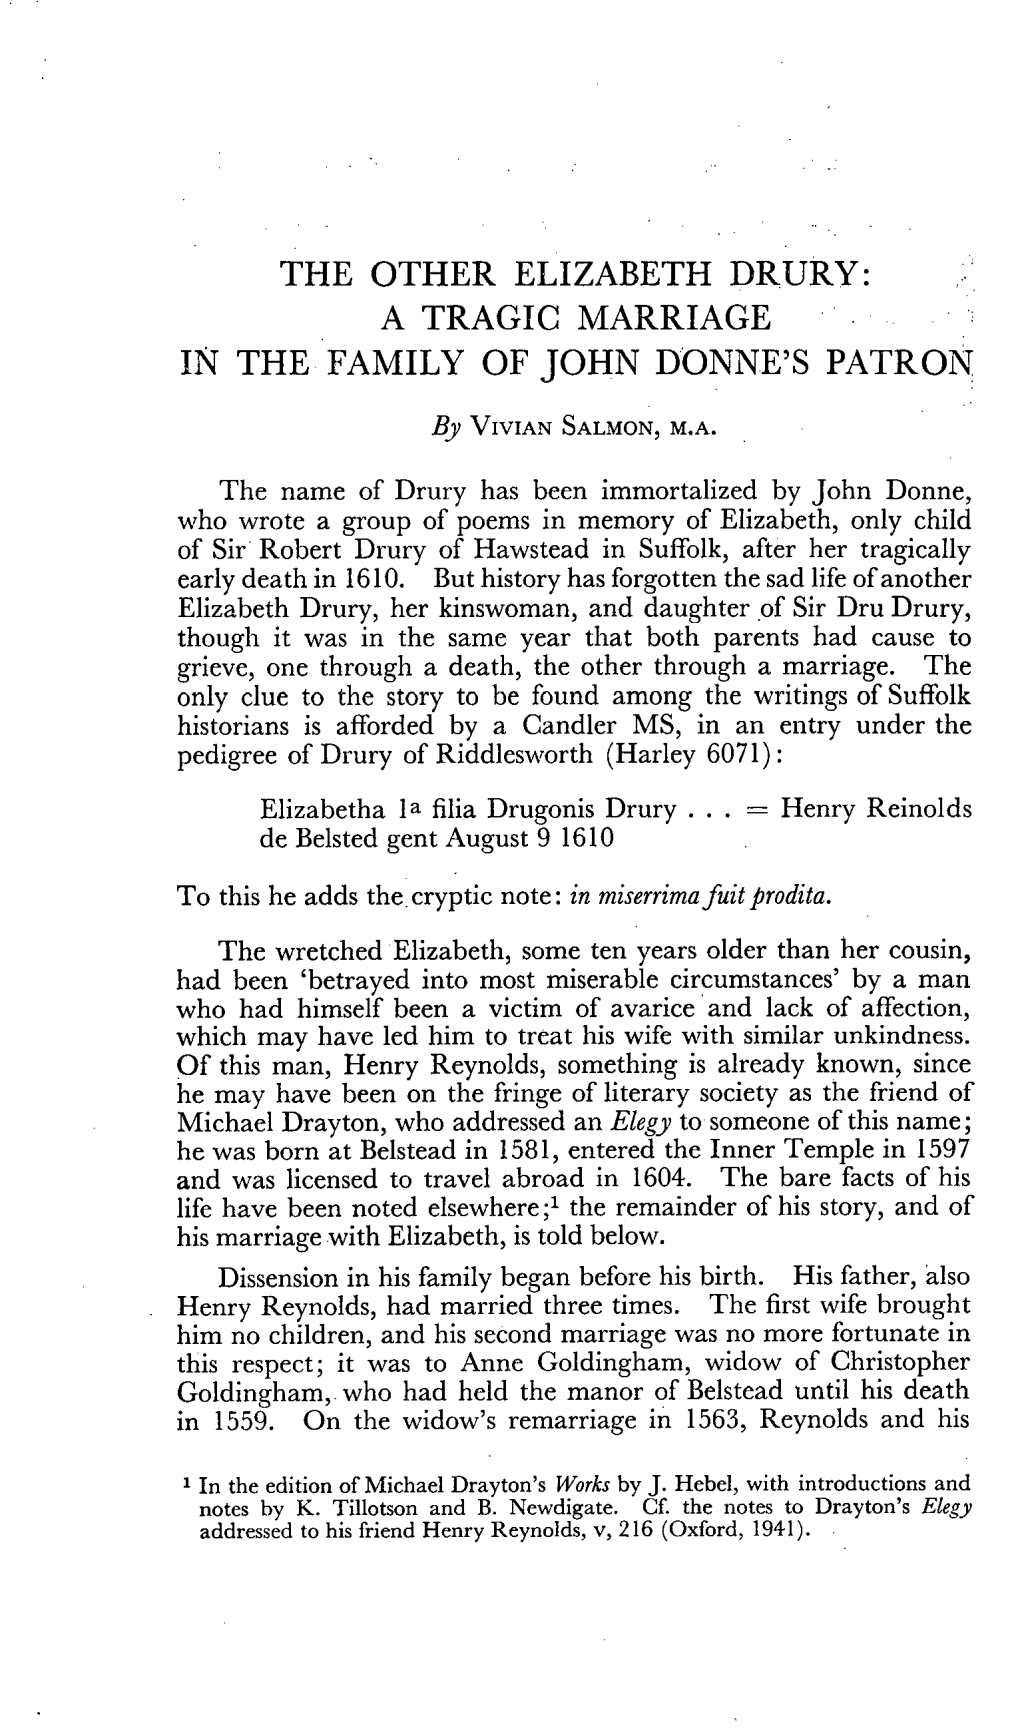 The Other Elizabeth Drury:� a Tragic Marriage� in the Family of John Donne's Patron